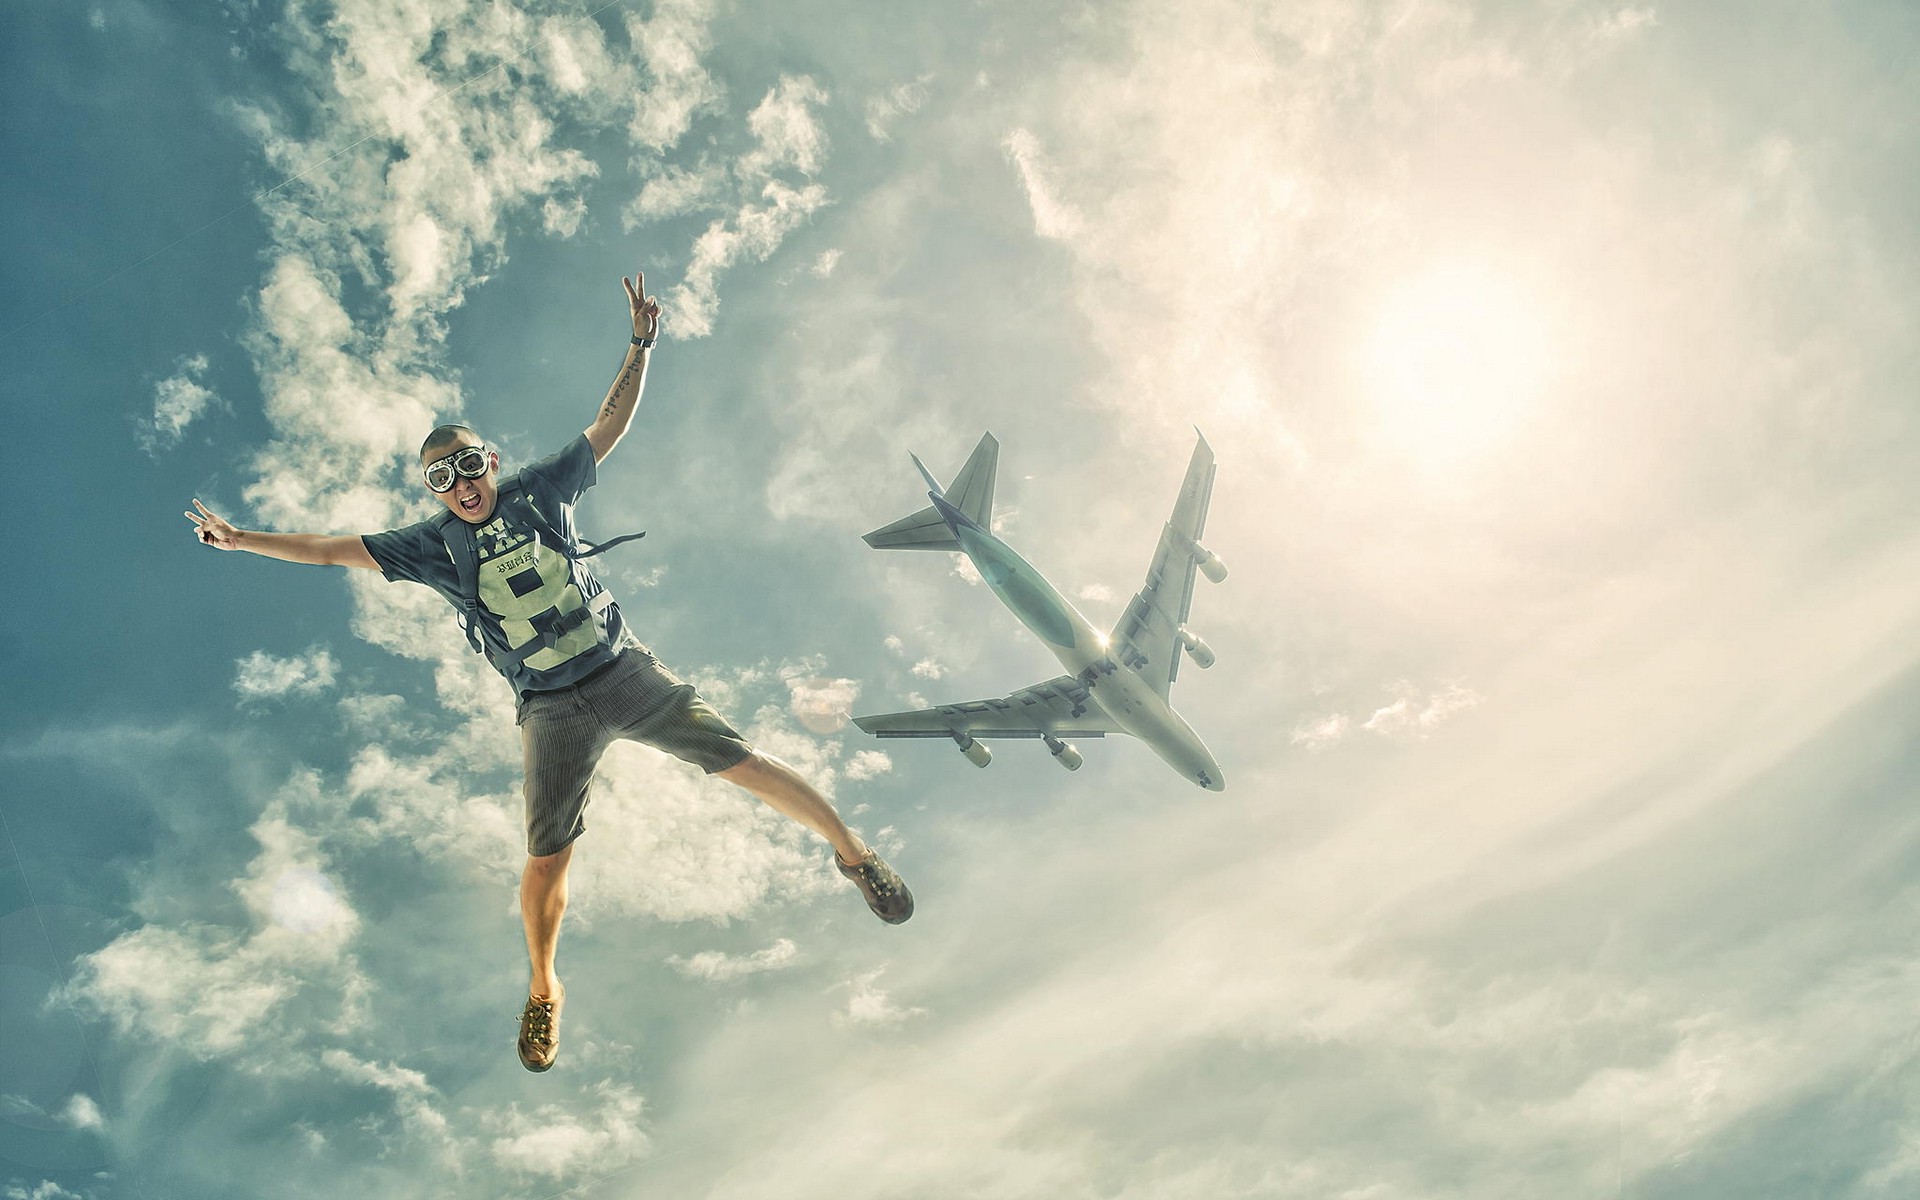 landscape, Jumping, Airplane, Sky, Sun, Clouds, Skydiver, Sports Wallpaper